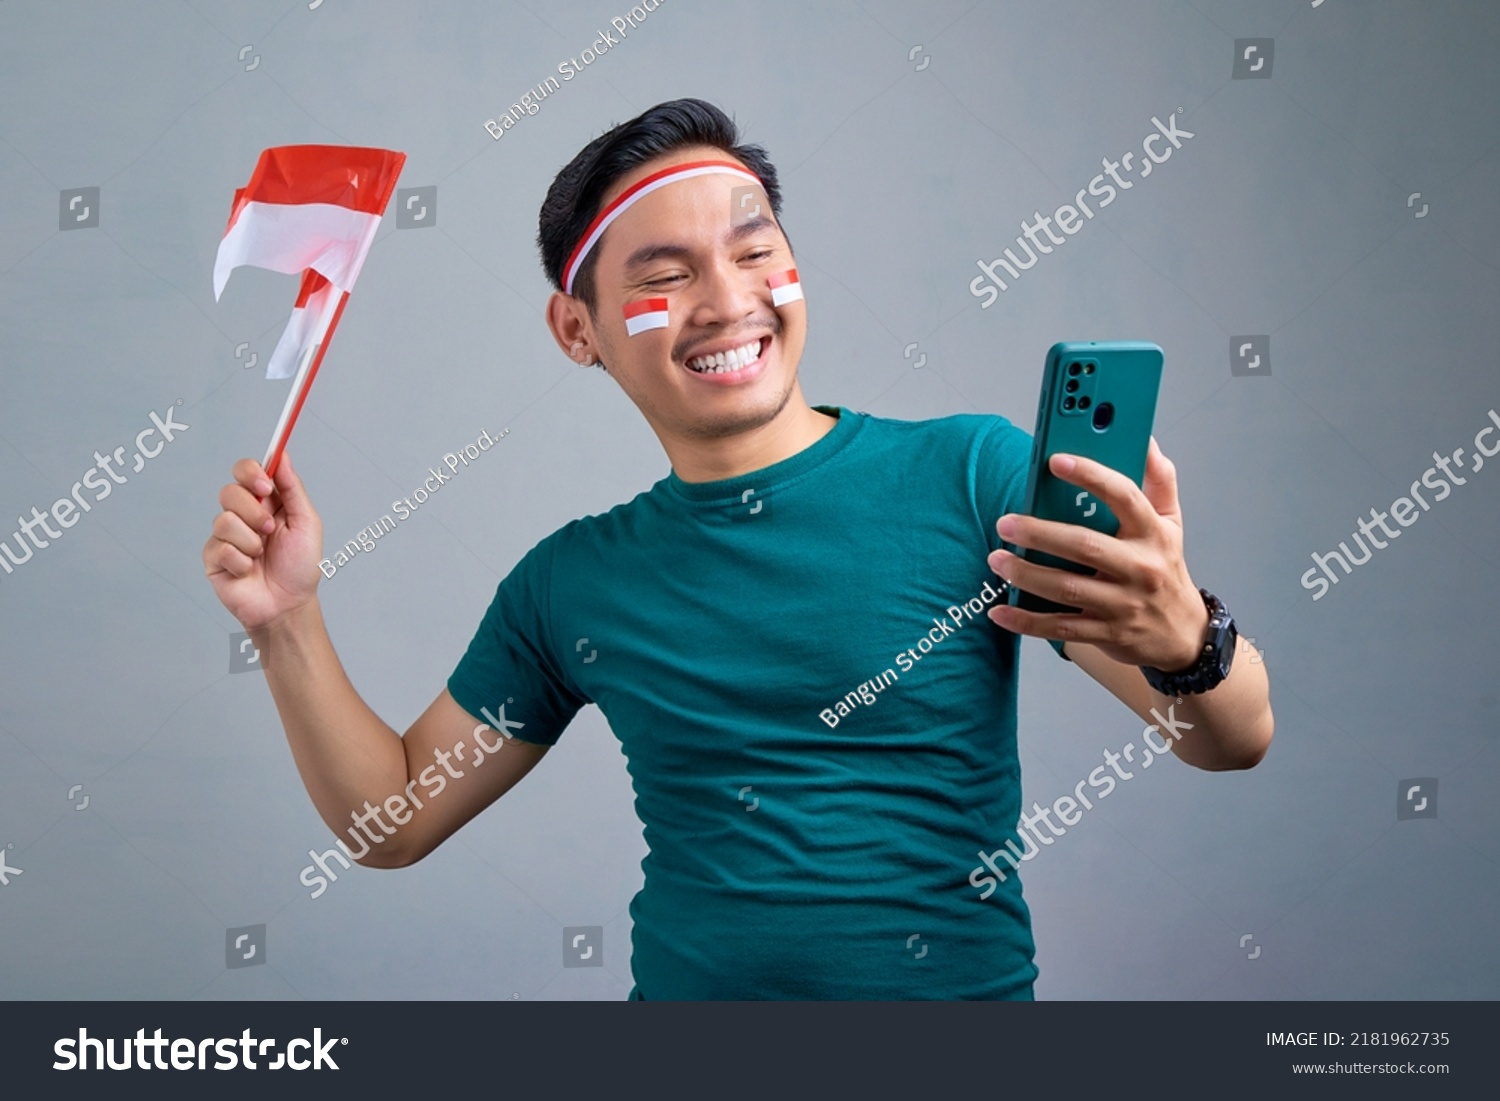 Excited young Asian man holding mobile phone and indonesian flag while celebrating indonesia independence day isolated on grey background. indonesia independence day celebration concept #2181962735